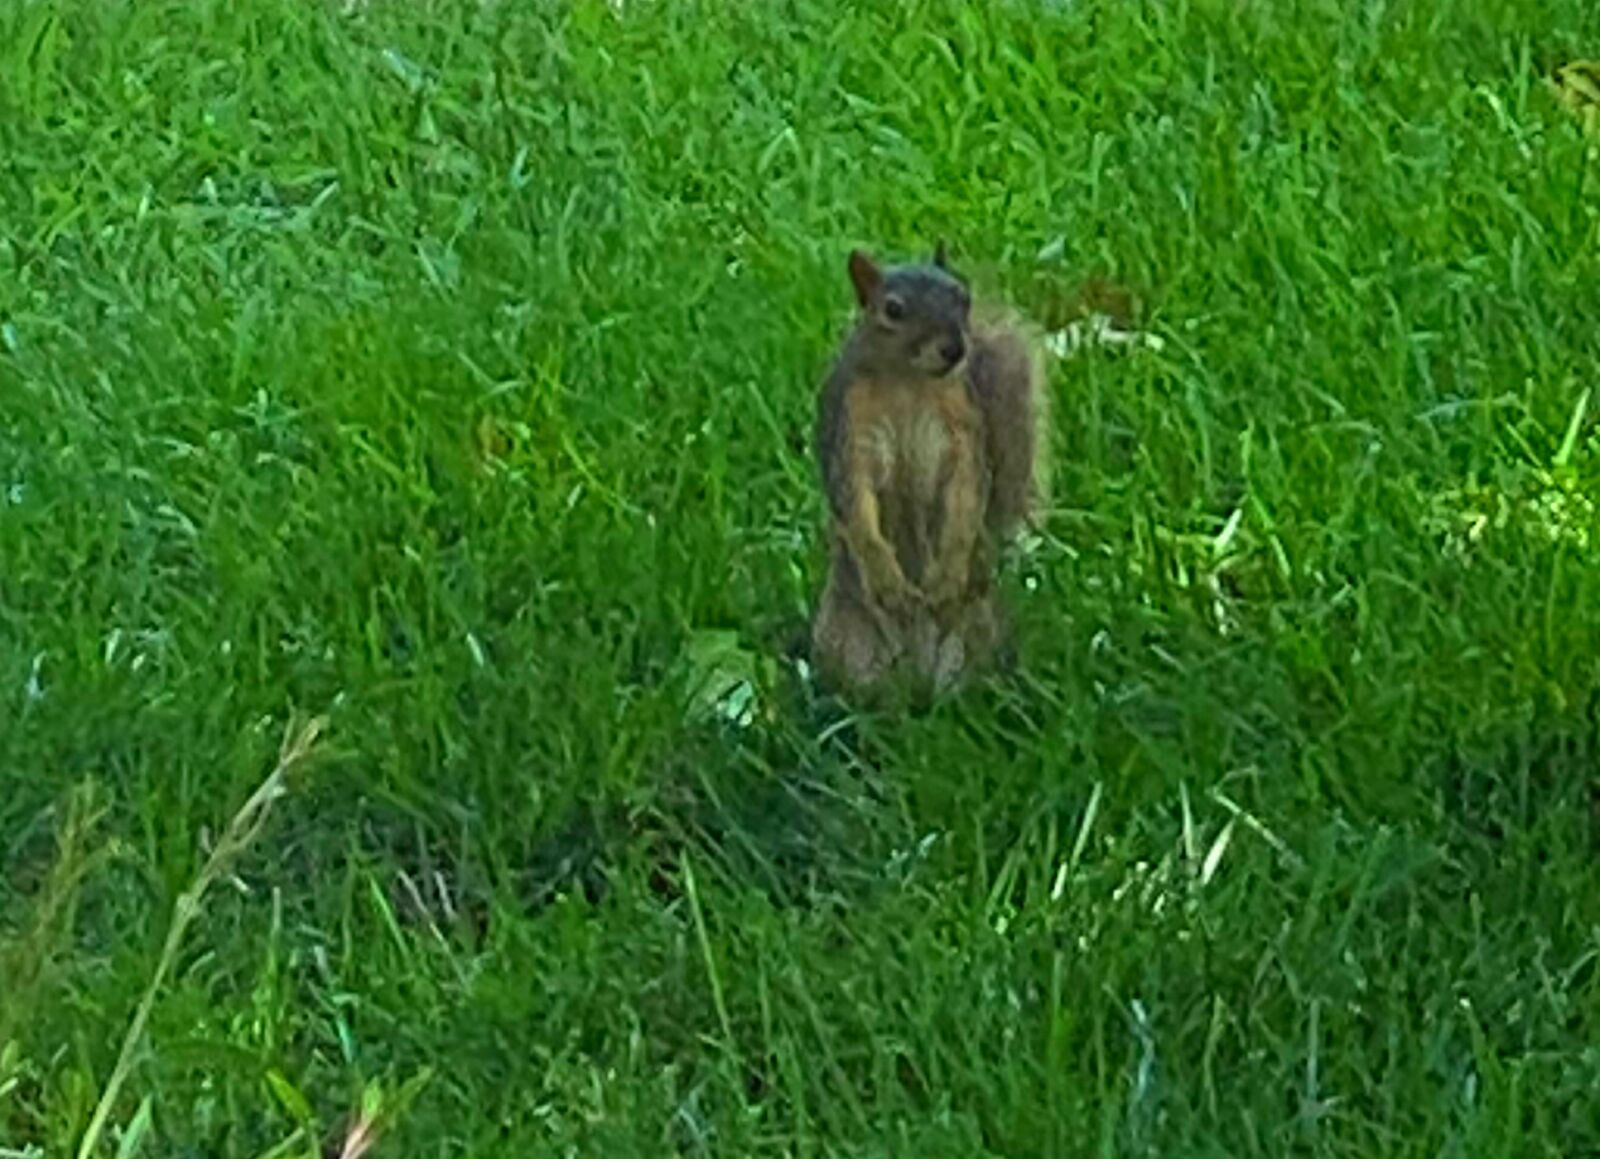 iPhone 11 Pro Max back triple camera 6mm f/2 sample photo. Squirrel, playing, nature photography